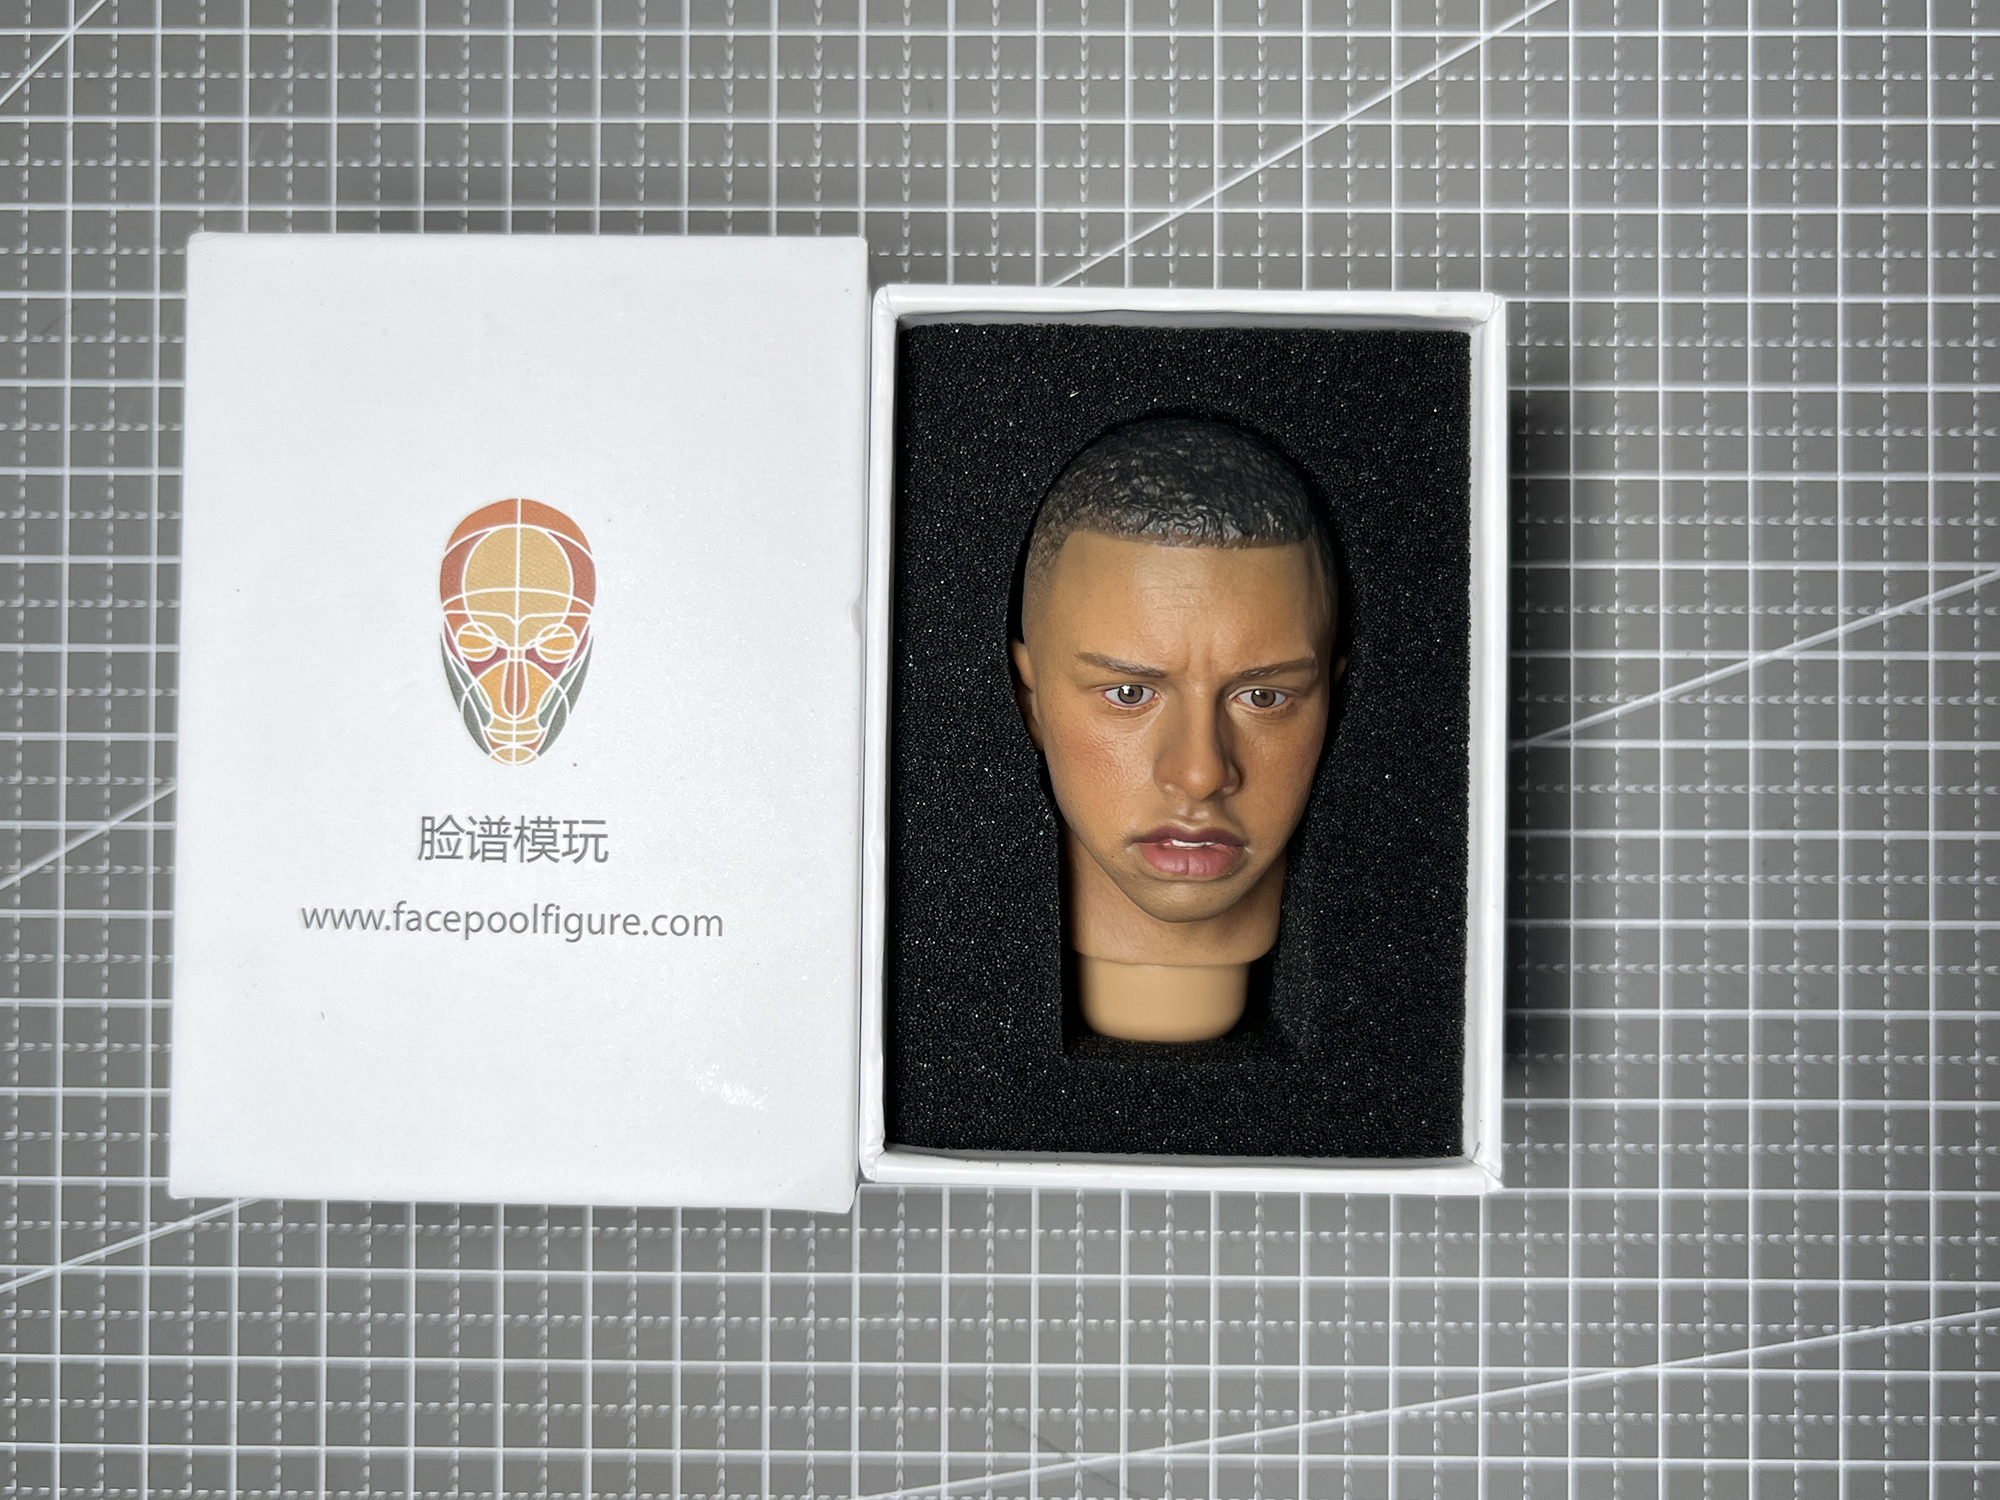 FacepoolFigure 1/6 Black Male Head Sculpt with Expression FP-S-002 –  Facepoolfigure Online Store